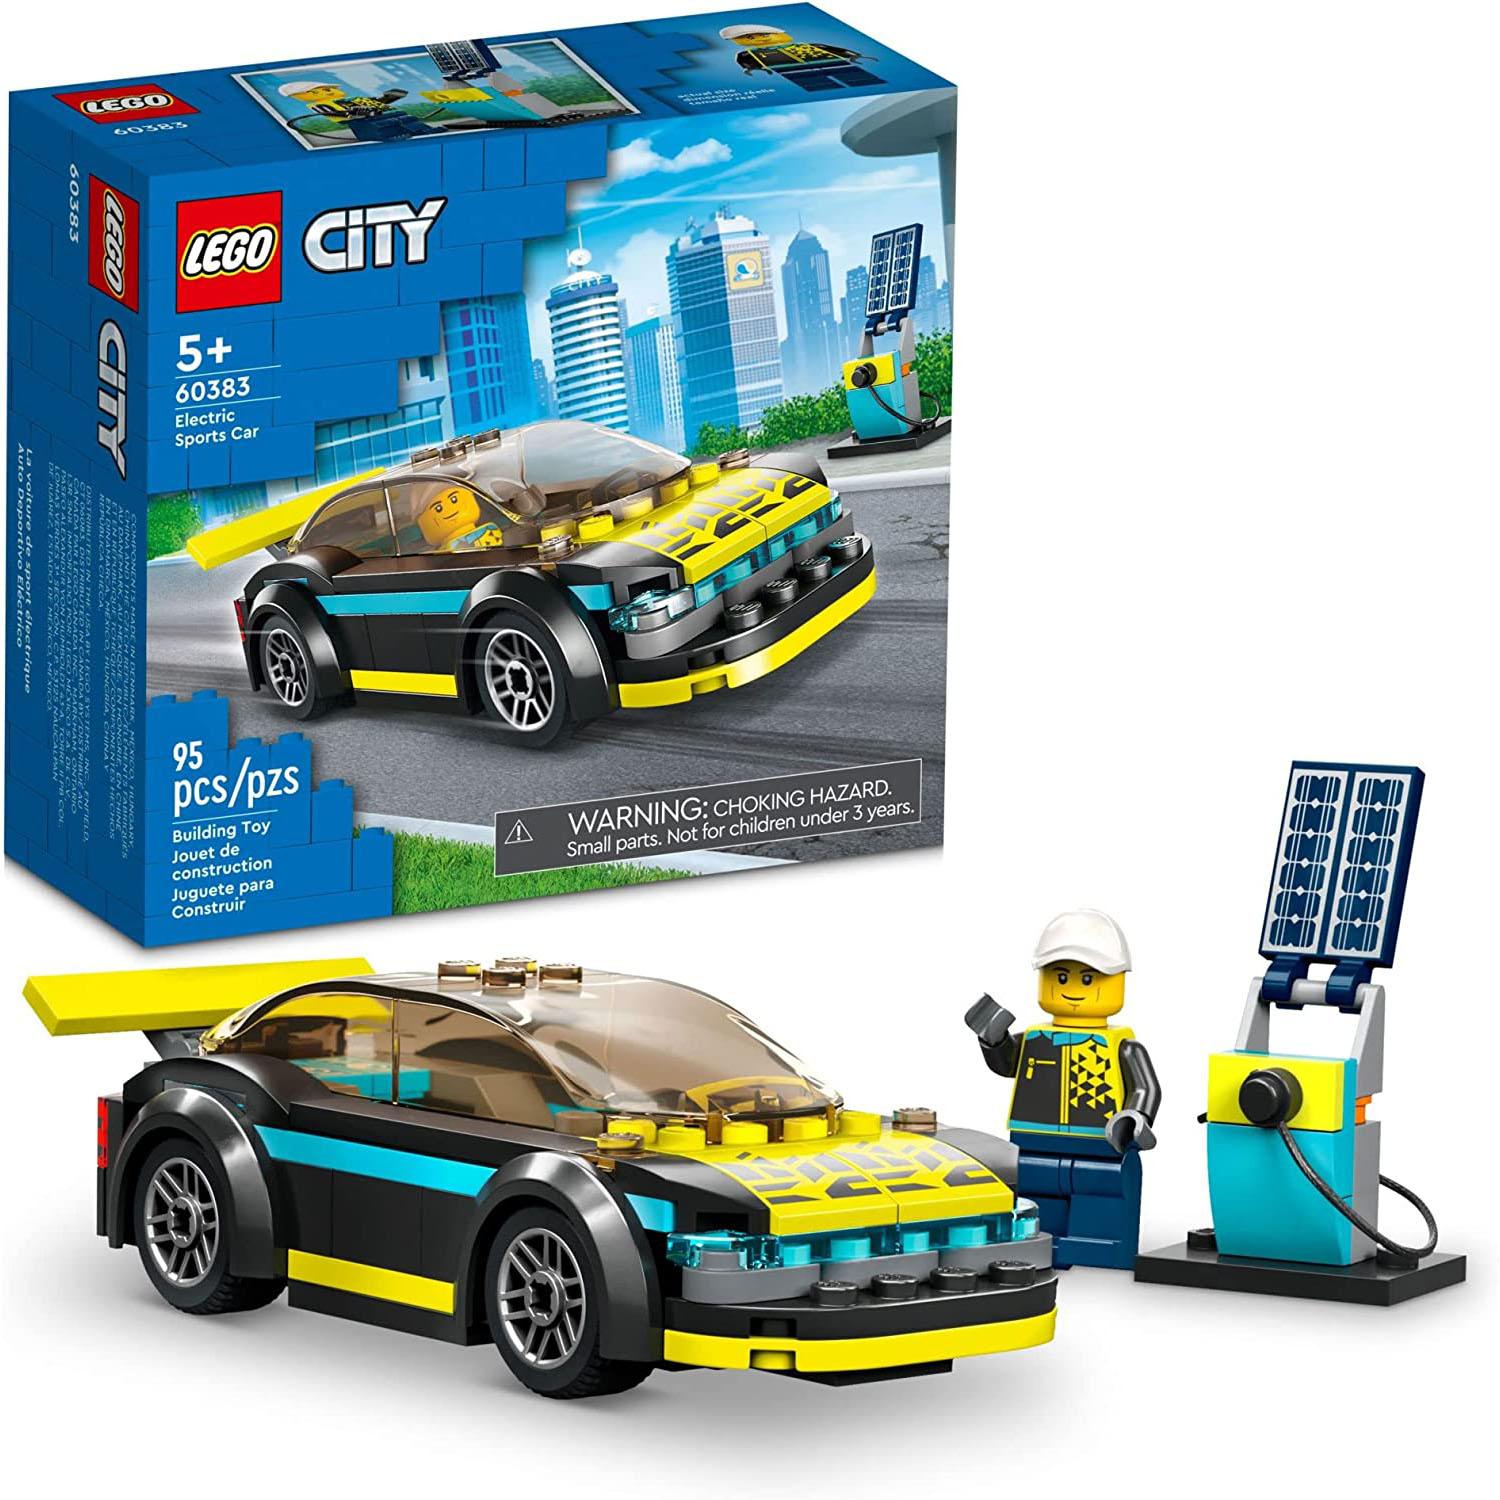 Lego City Electric Sports Car Building Set 60383 for $7.49